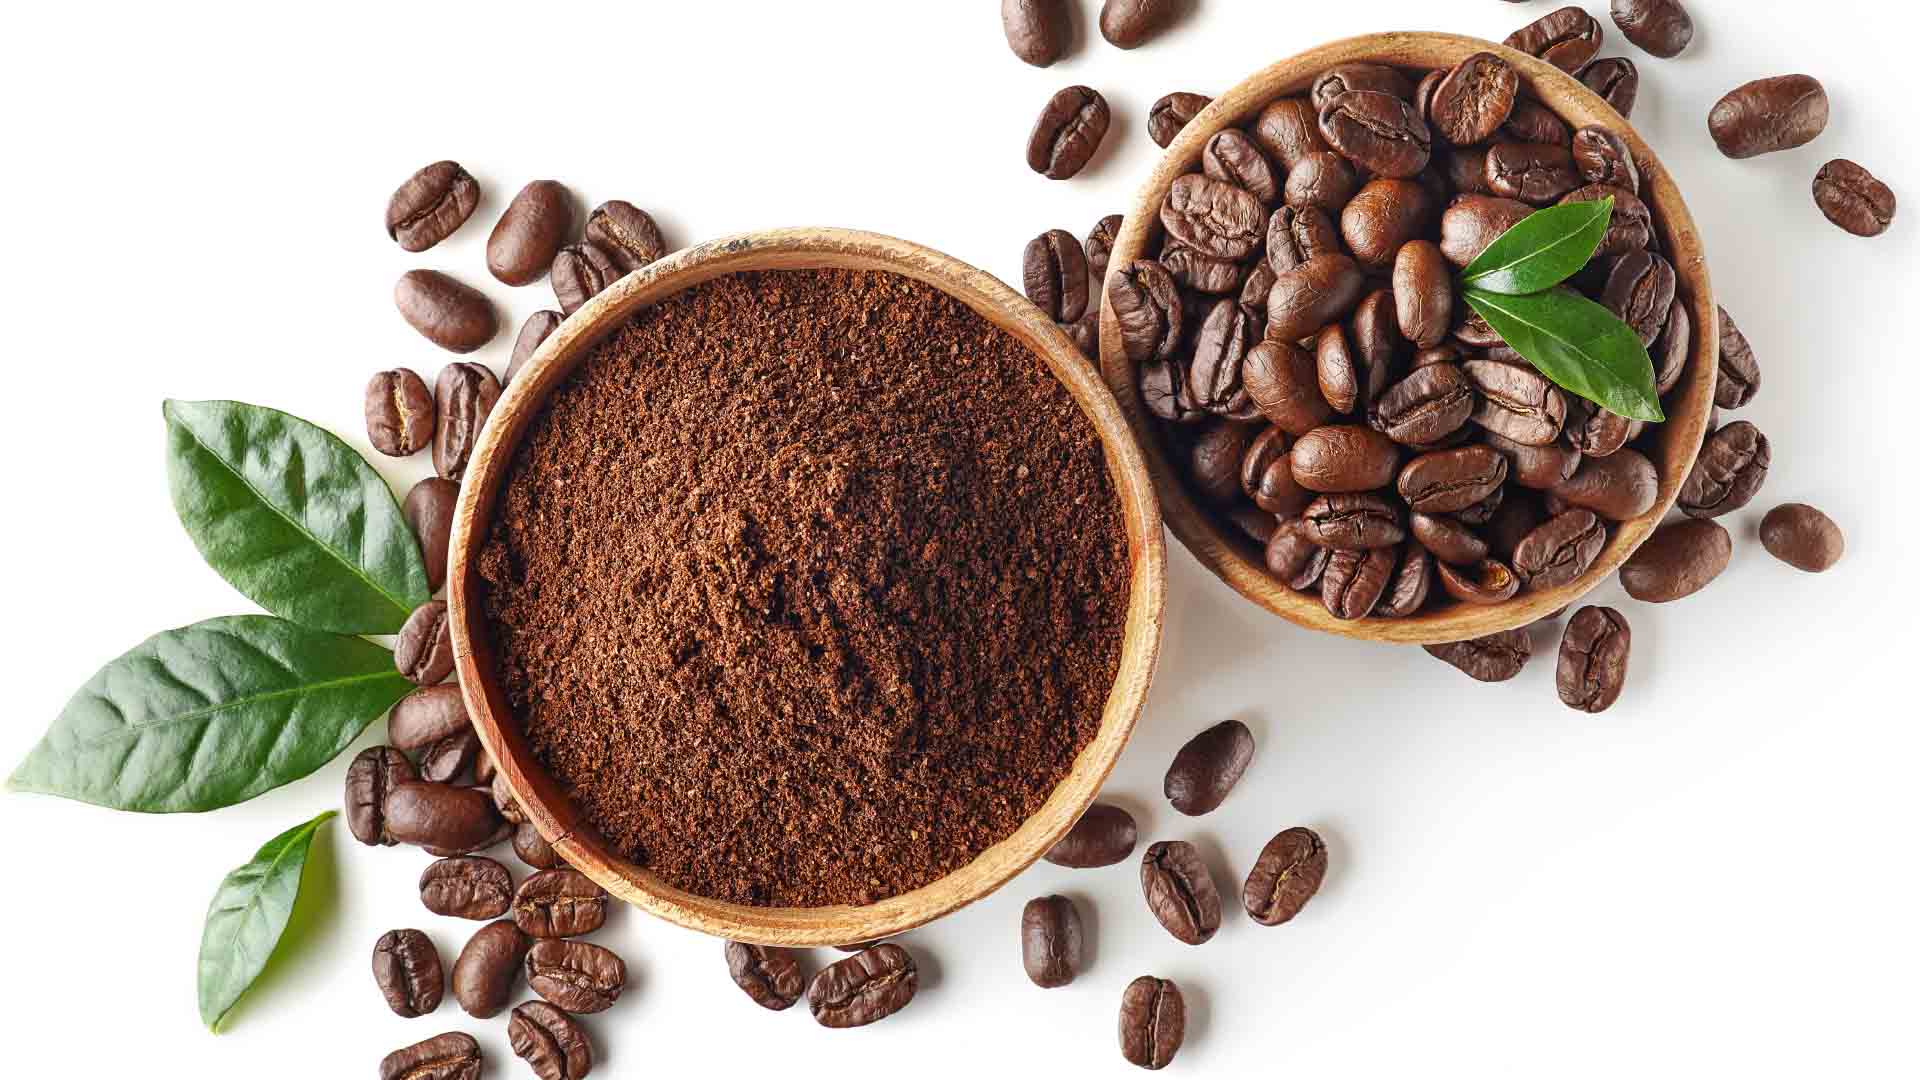 An image shows two bows, one with freshly ground coffee and the other with roasted coffee beans with coffee tree leaves on top.